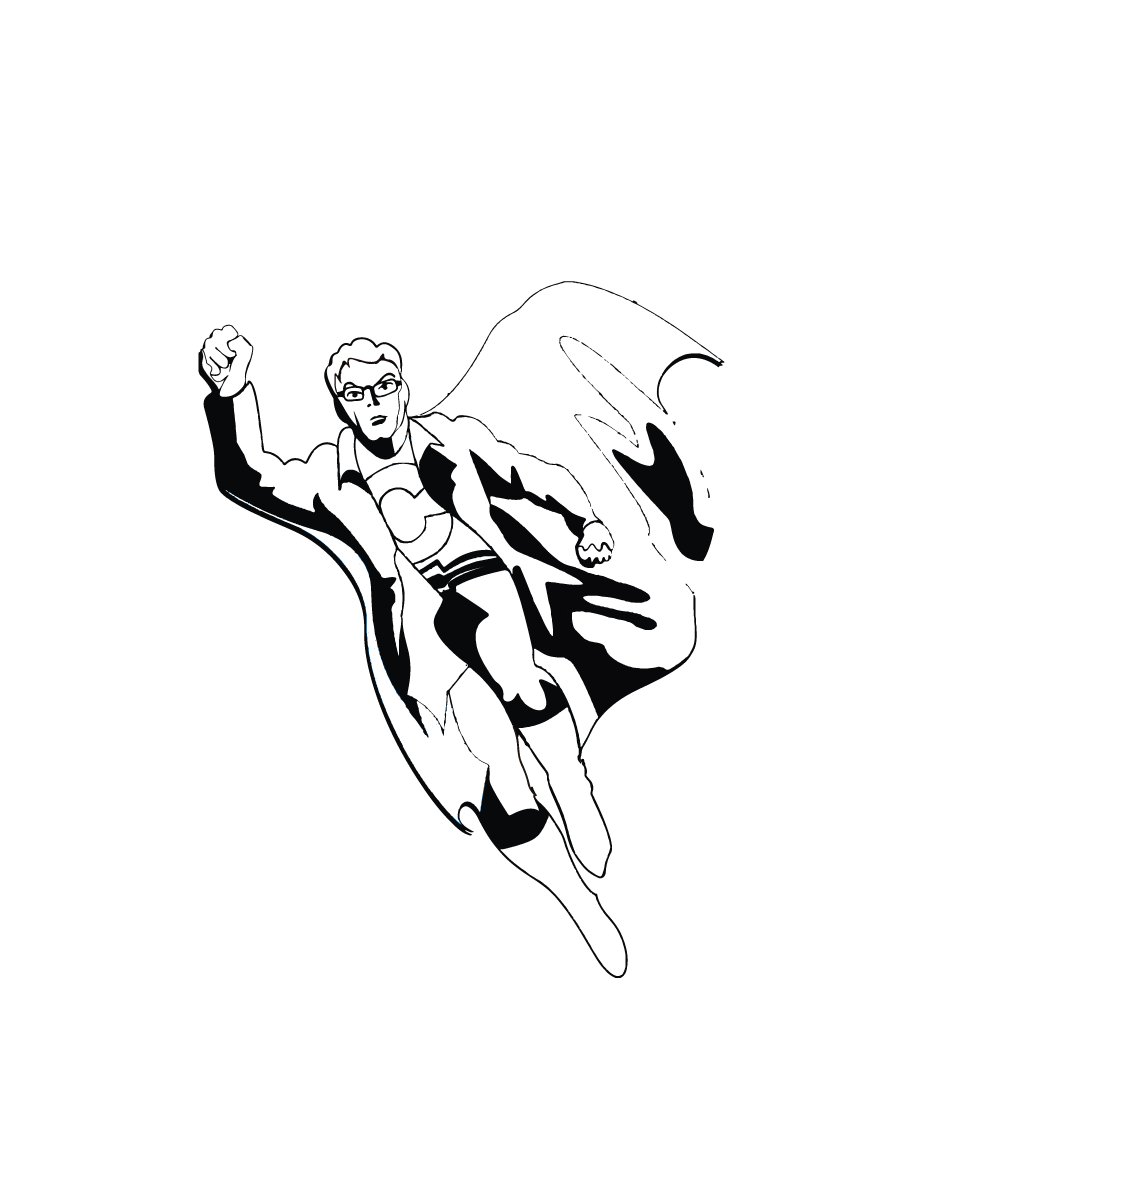 Workers Compensation Logo used in Footer of the Empower Disability Website